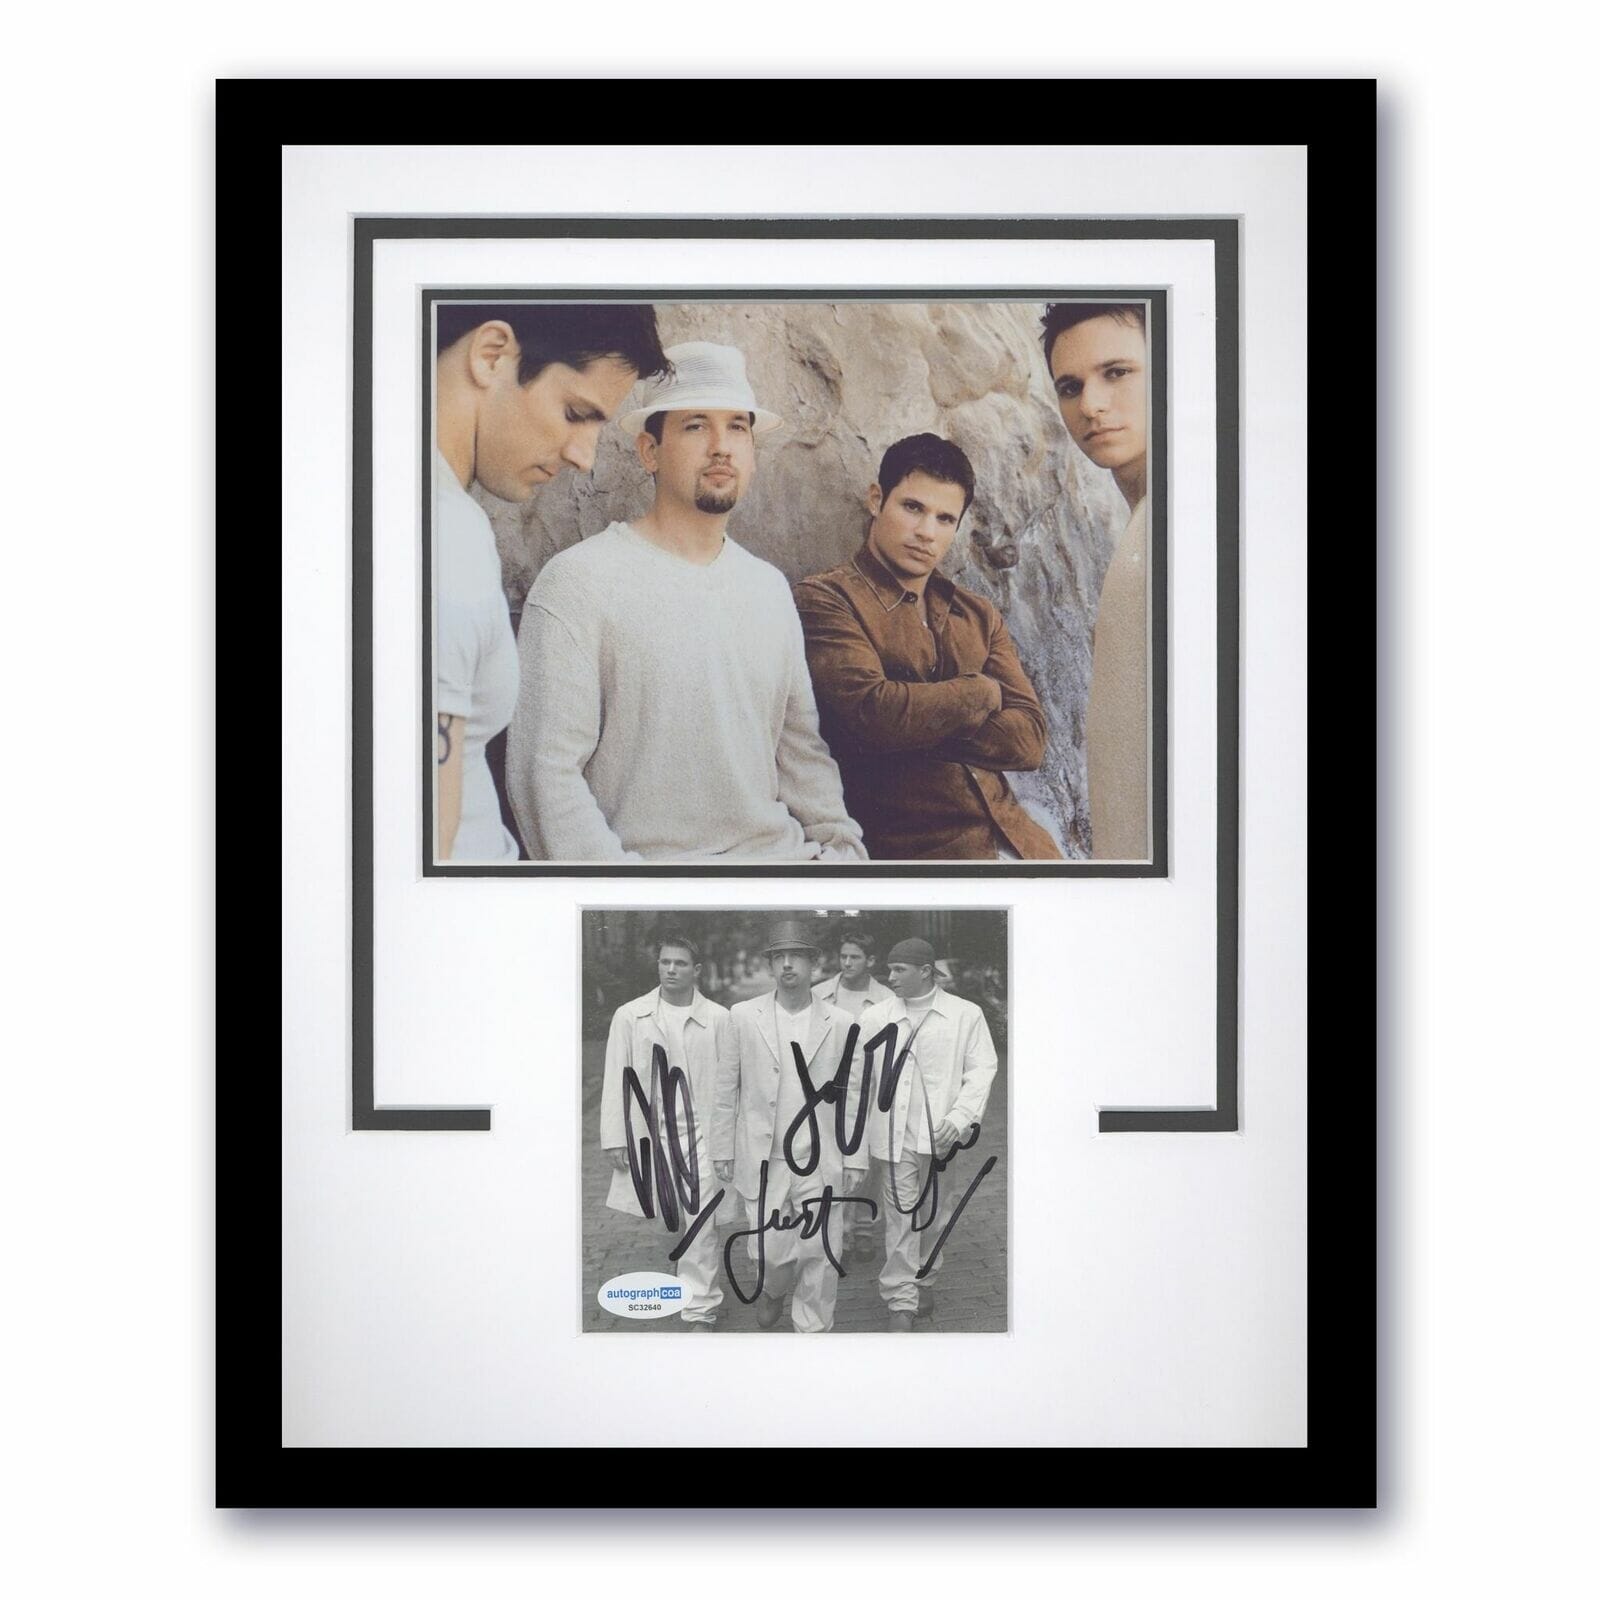 98 Degrees 98 Degrees and Rising AUTOGRAPH Signed Framed 11x14